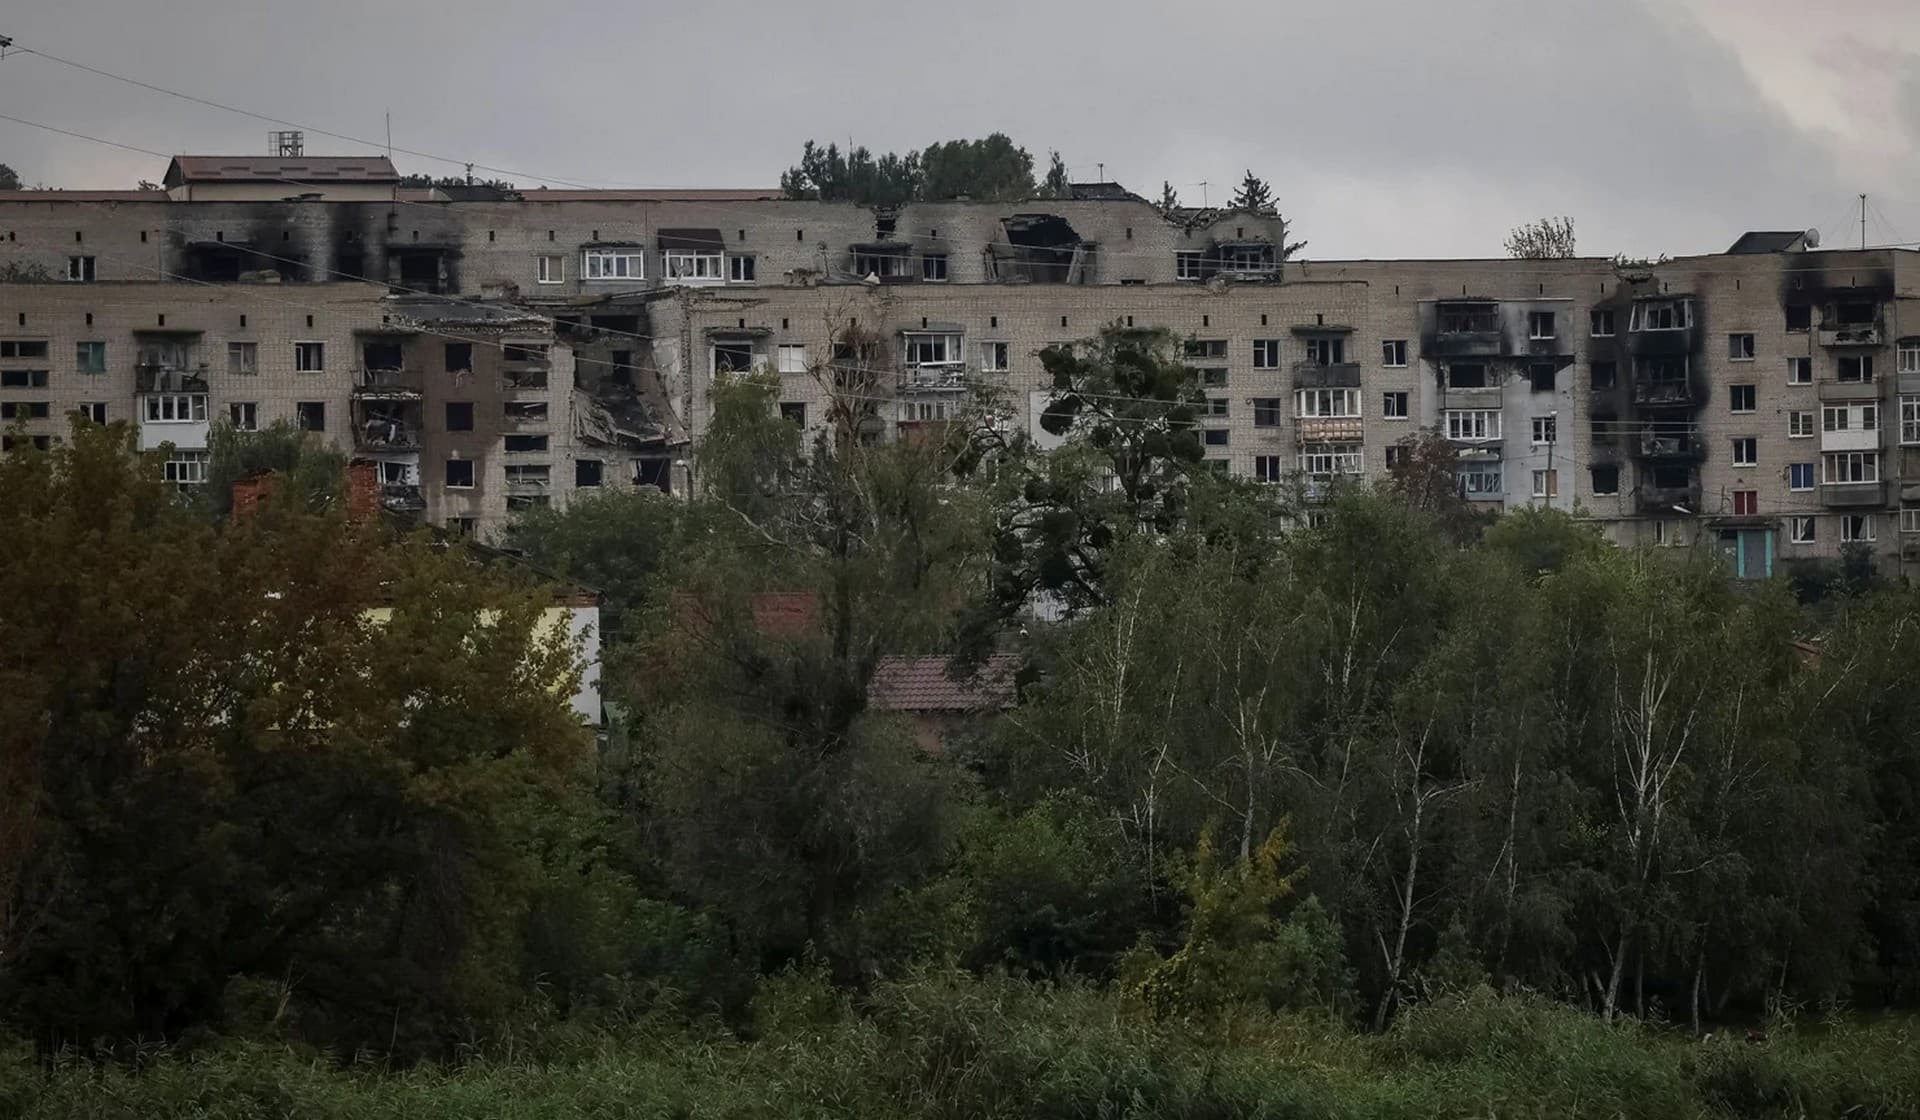 Damaged apartments in the town of Izium